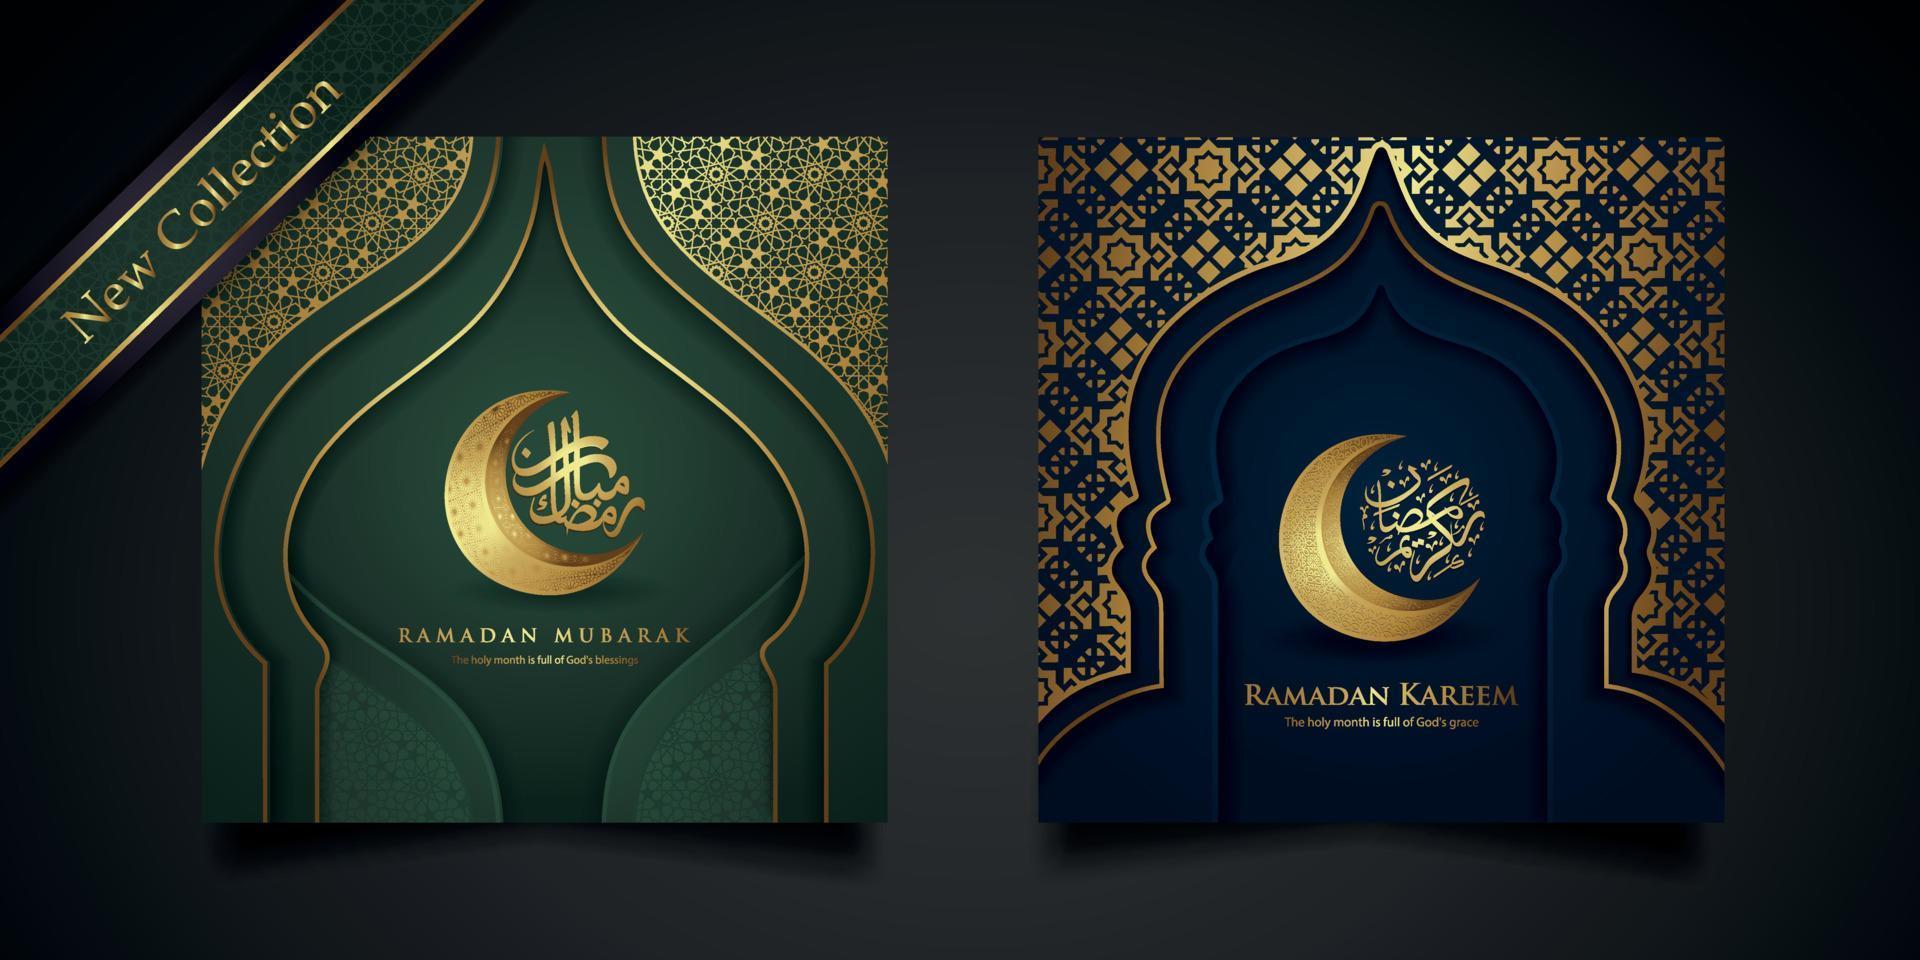 Ramadan background islamic greeting design with mosque door with floral ornament and arabic calligraphy vector